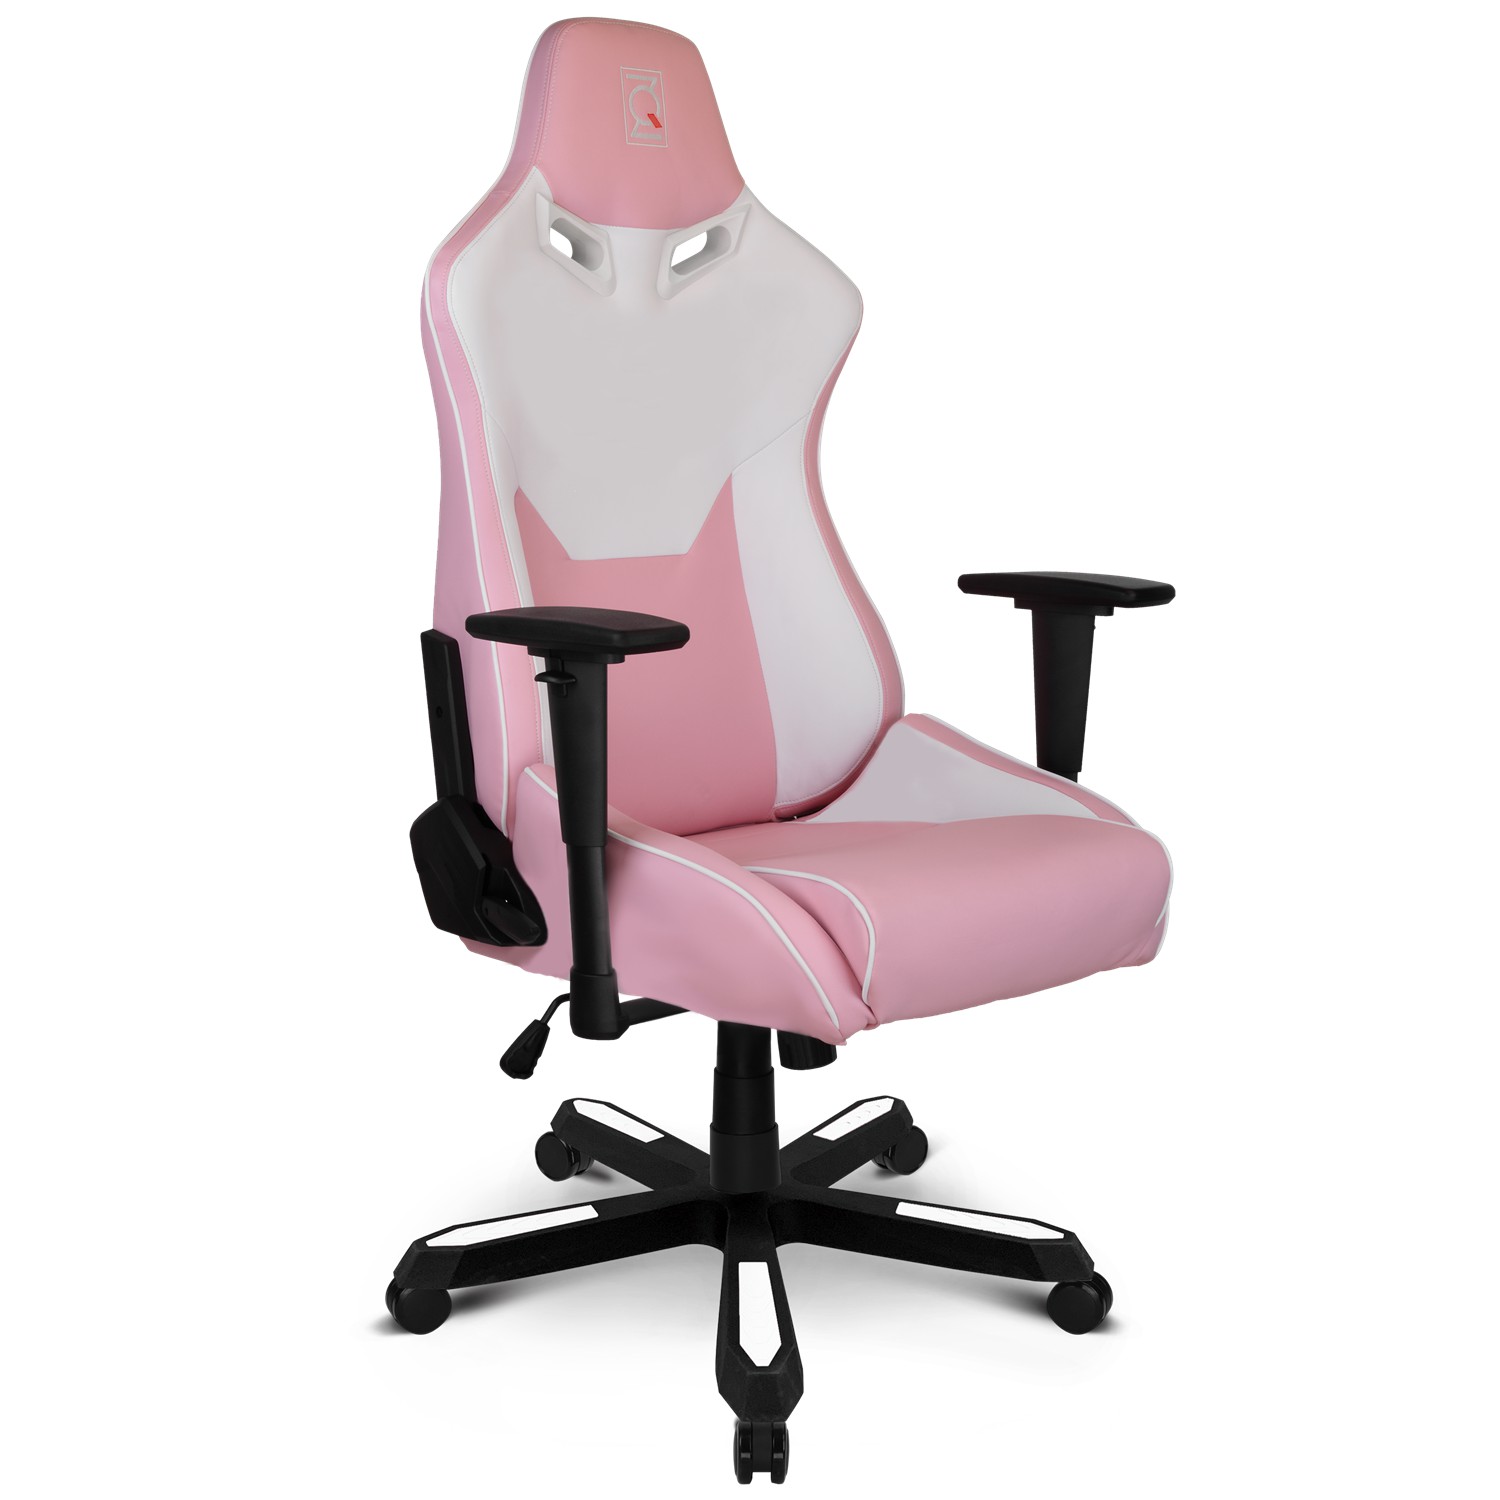 Zqracing Viper Series Gaming Office Chair Pink White Zqracing